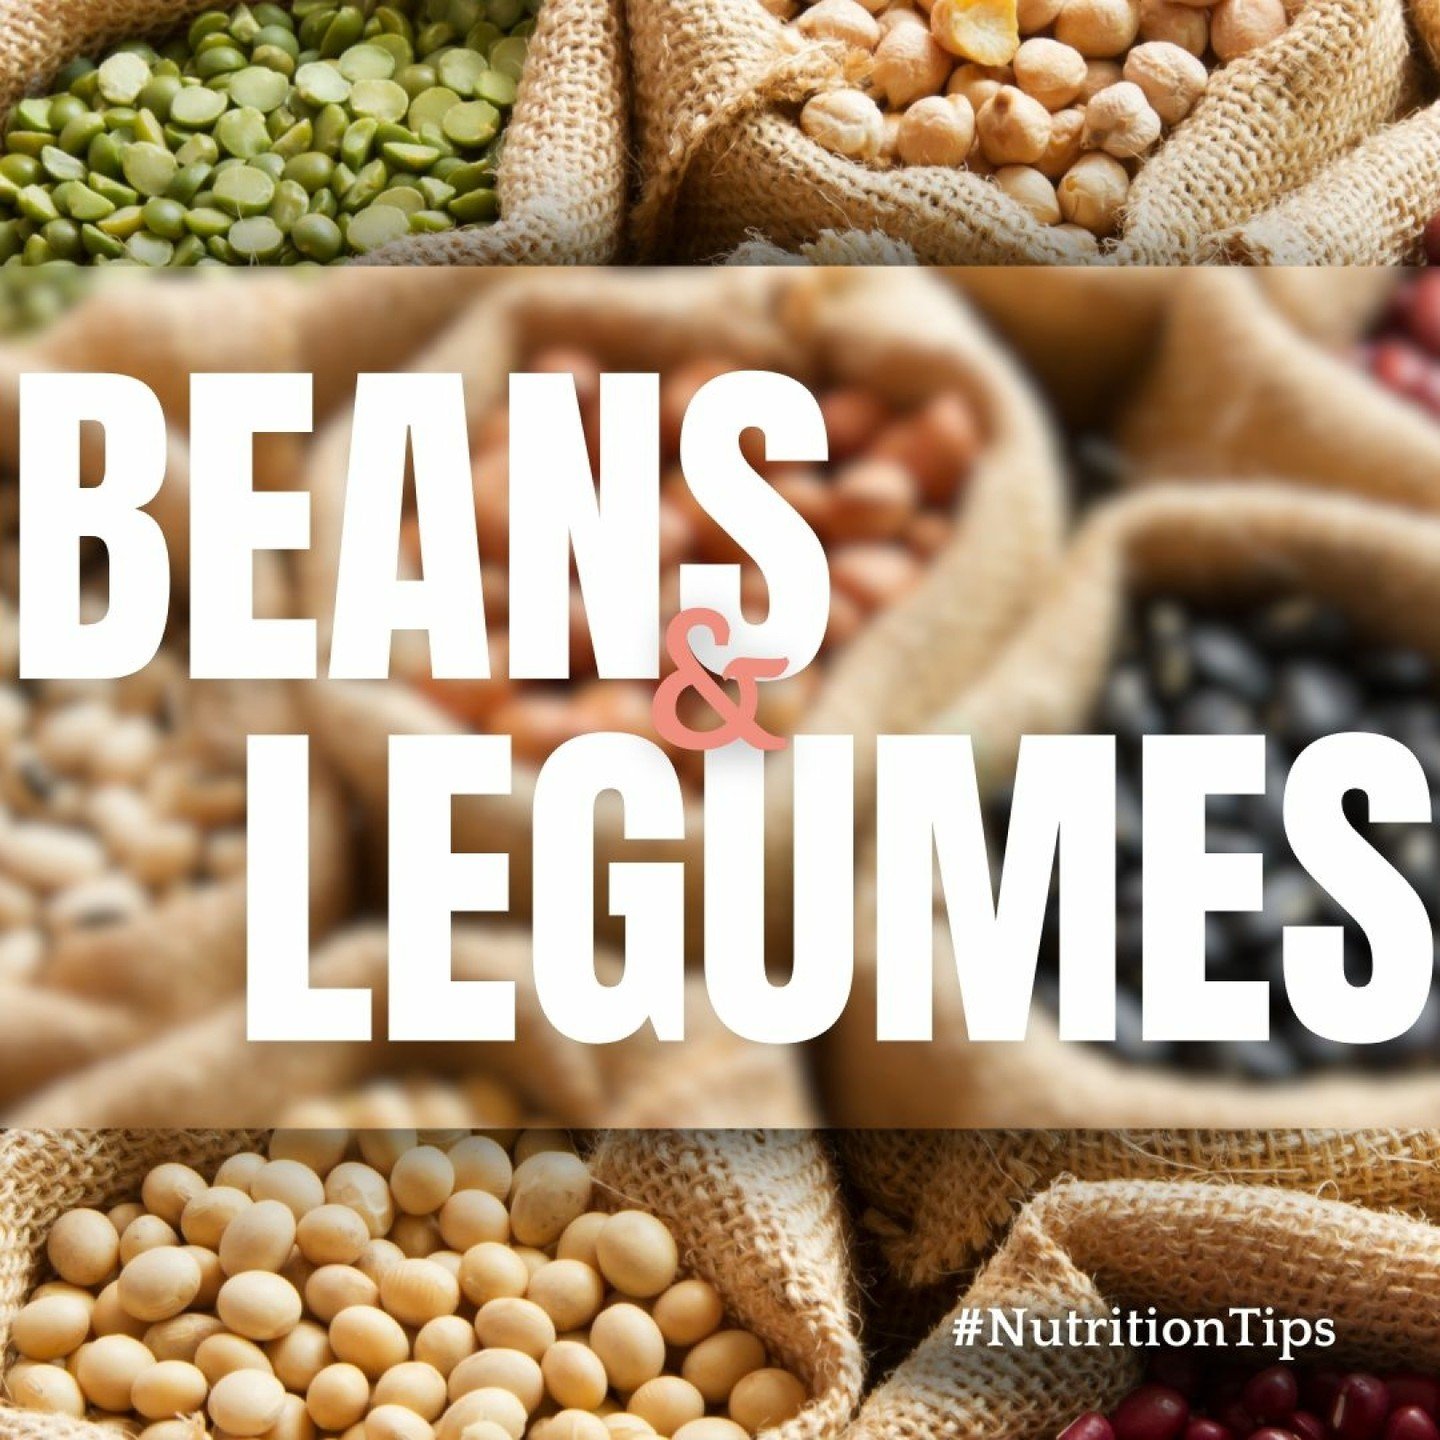 🫘Beans and legumes are nutritional powerhouses that deserve a spot in your daily diet!

🫘These versatile foods are rich in protein, making them an excellent option for plant-based and meat-eaters. 

🫘They also provide dietary fiber, which is cruci